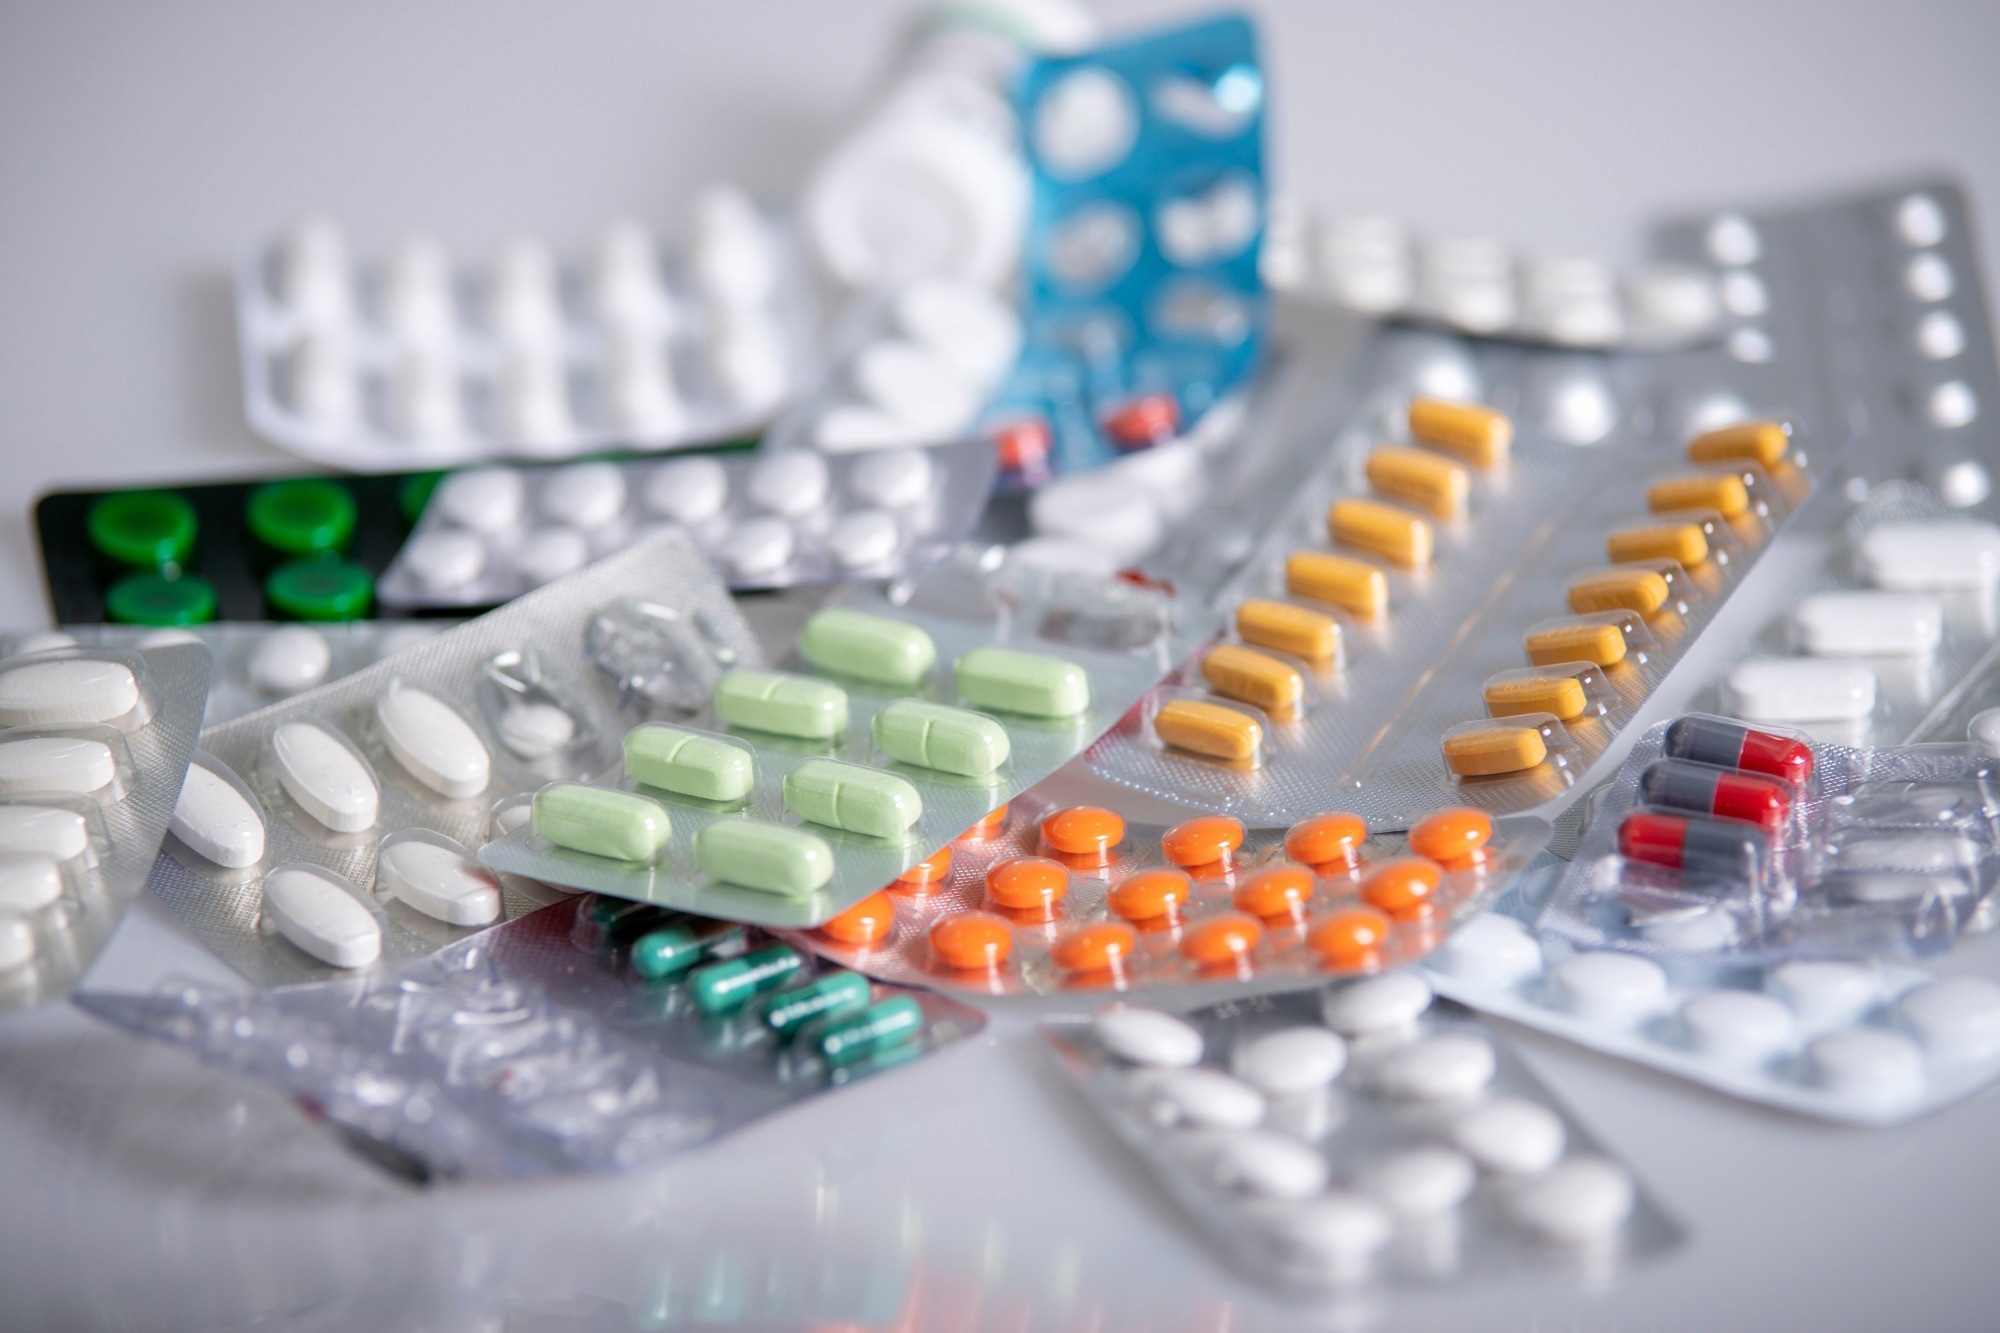 Study: Projected Savings for Generic Oncology Drugs Purchased via Mark Cuban Cost Plus Drug Company Versus in Medicare. Image Credit: Celil Kirnapci / Shutterstock.com